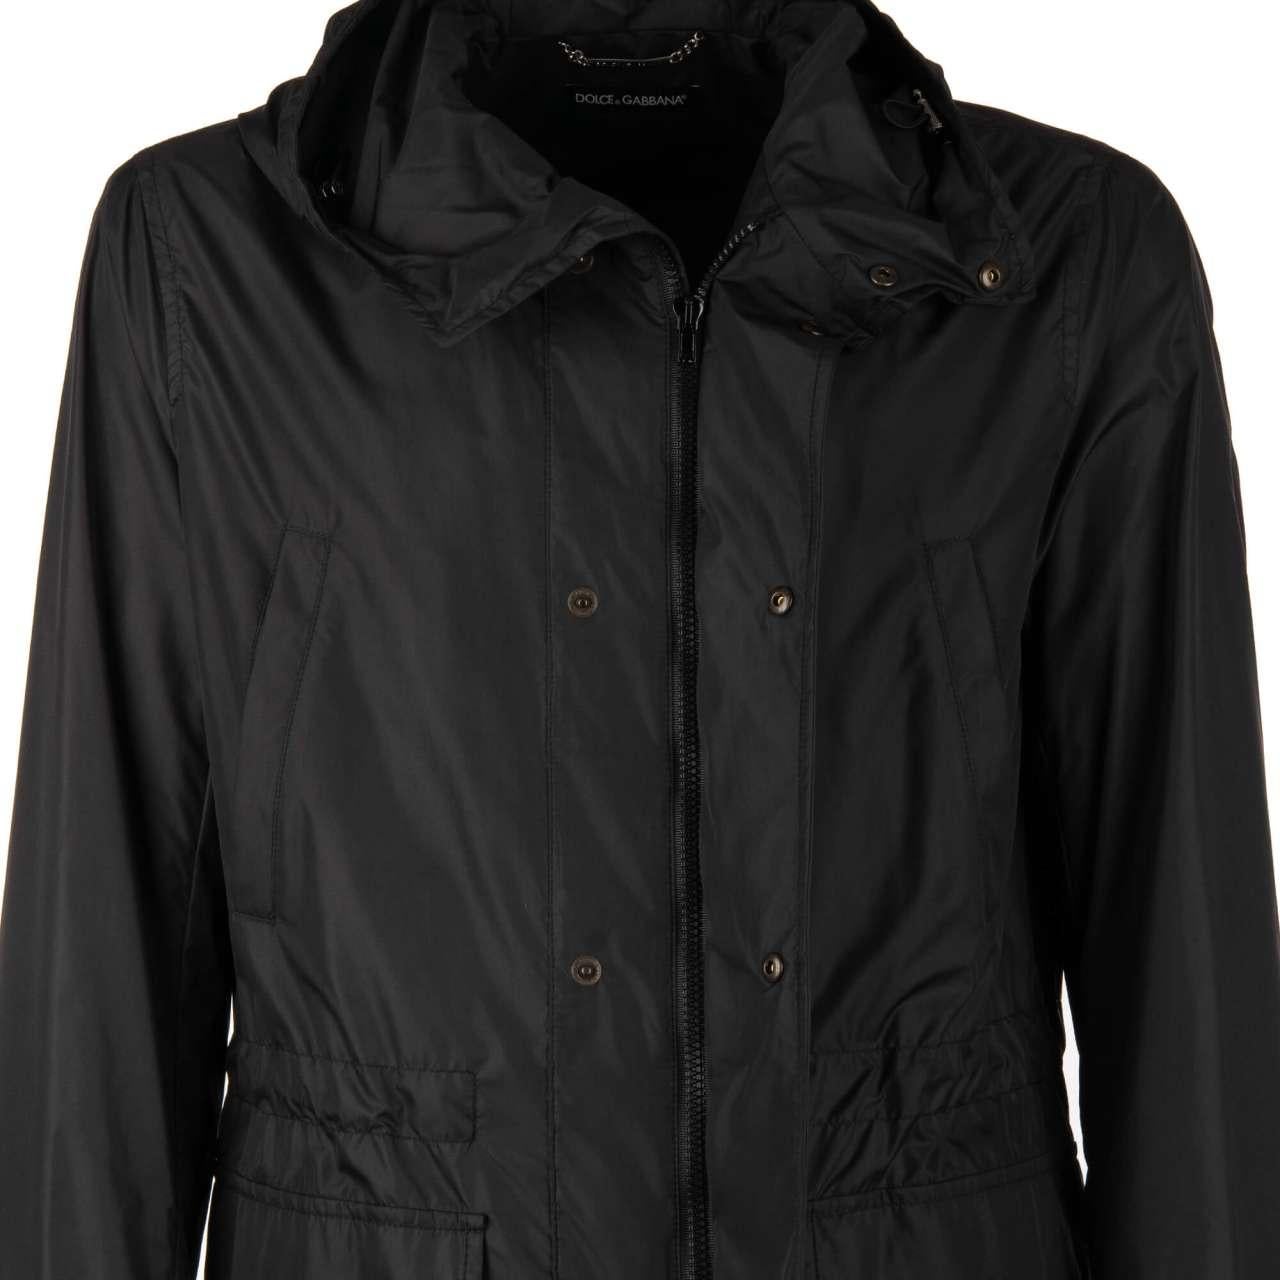 Dolce & Gabbana Classic Rain Parka Jacket with Pockets and Hoody Black 46 For Sale 2